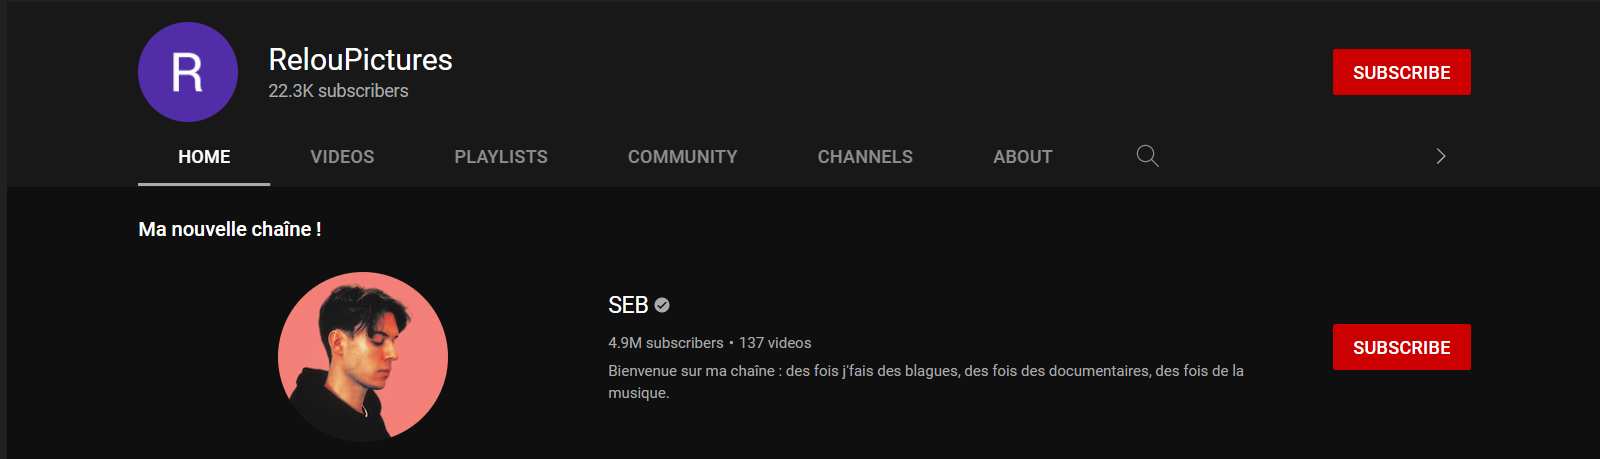 Old youtube channel of Seb la Frite, Relou Pictures